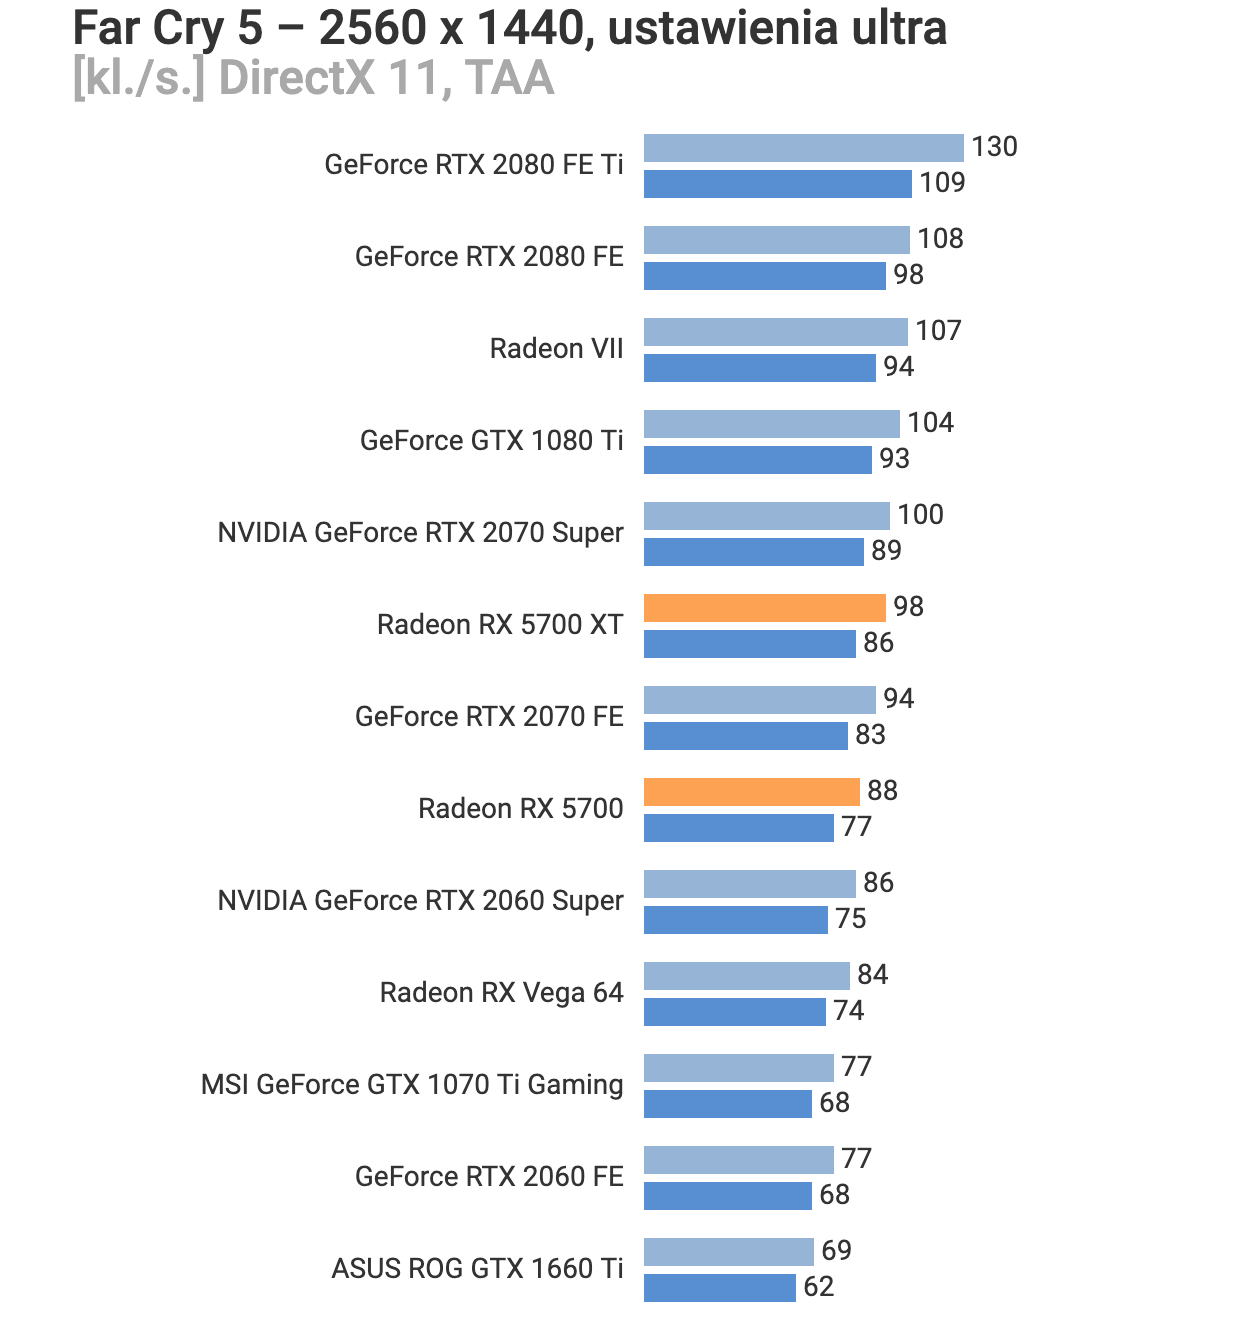 Media asset in full size related to 3dfxzone.it news item entitled as follows: Leaked Benchmarks: AMD Radeon RX 5700 Series vs NVIDIA GeForce RTX 20XX | Image Name: news29757_AMD-Radeon-5700-Series-Benchmark_2.png